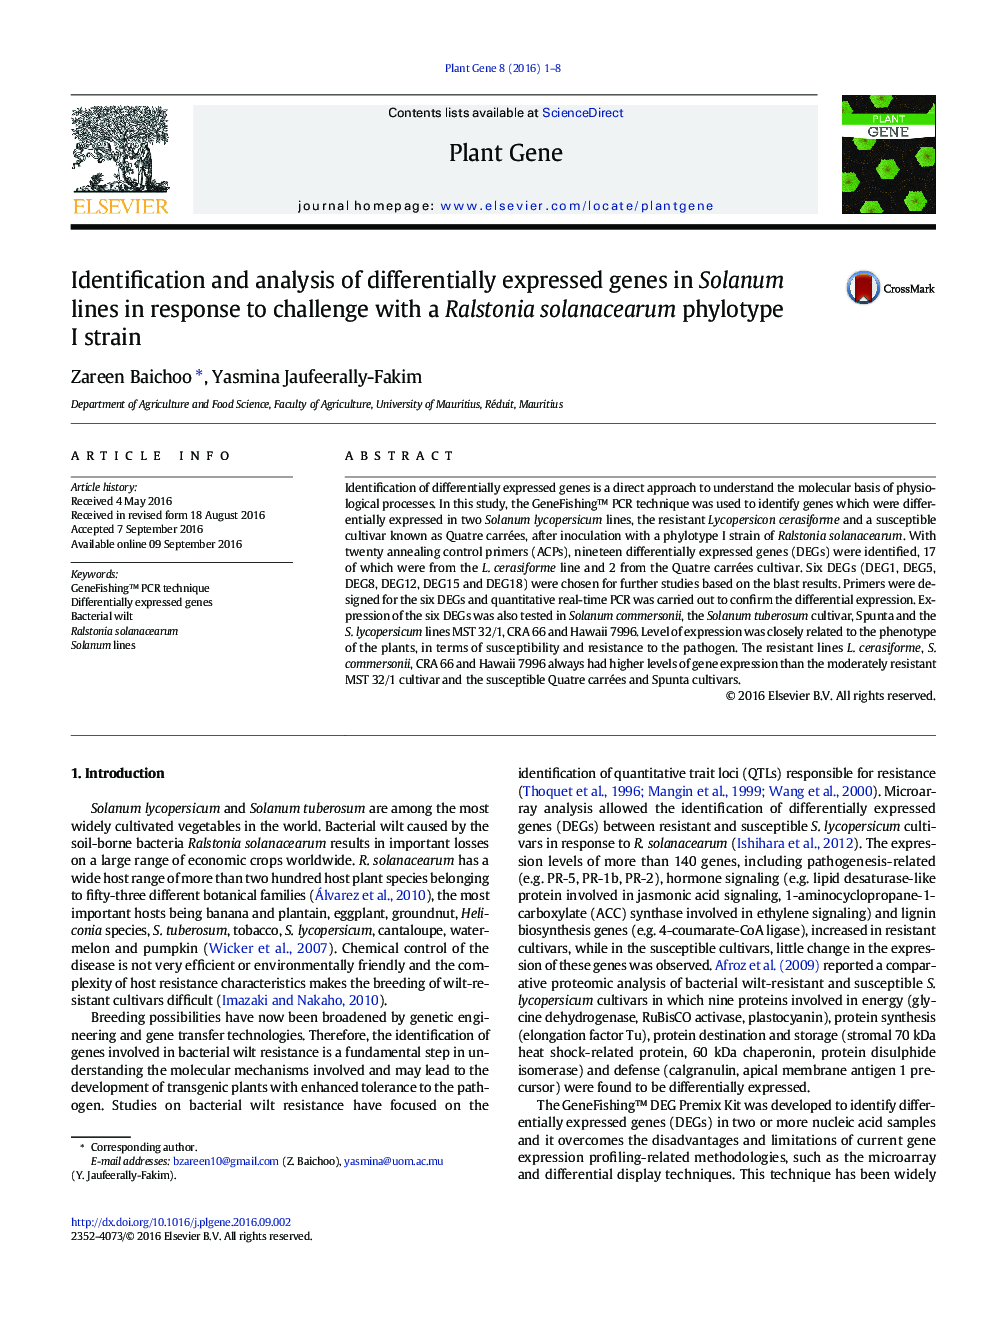 Identification and analysis of differentially expressed genes in Solanum lines in response to challenge with a Ralstonia solanacearum phylotype I strain